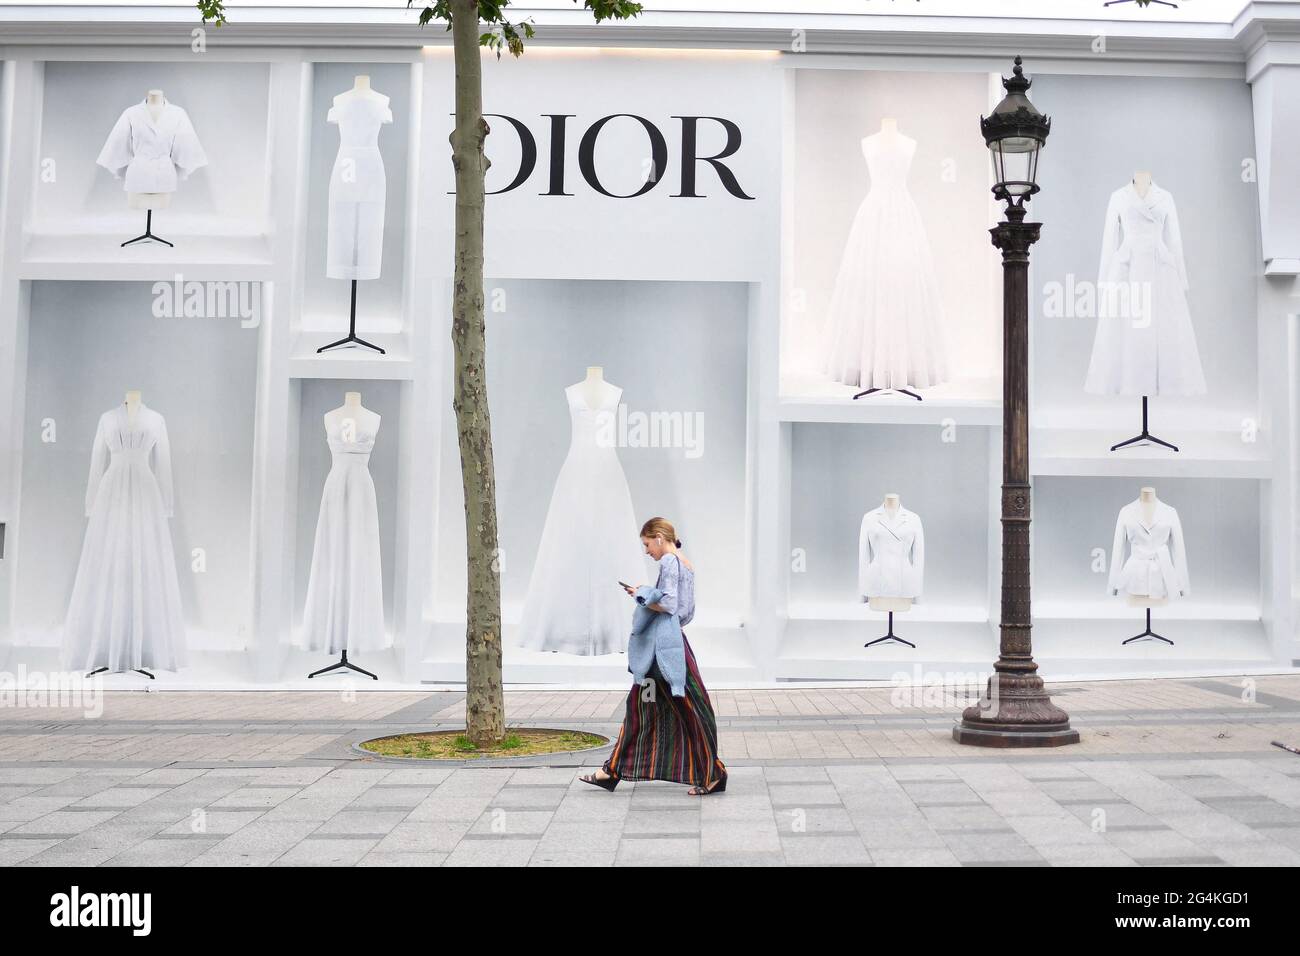 Dior goes back home: the joint venture of LVMH and Marcolin takes